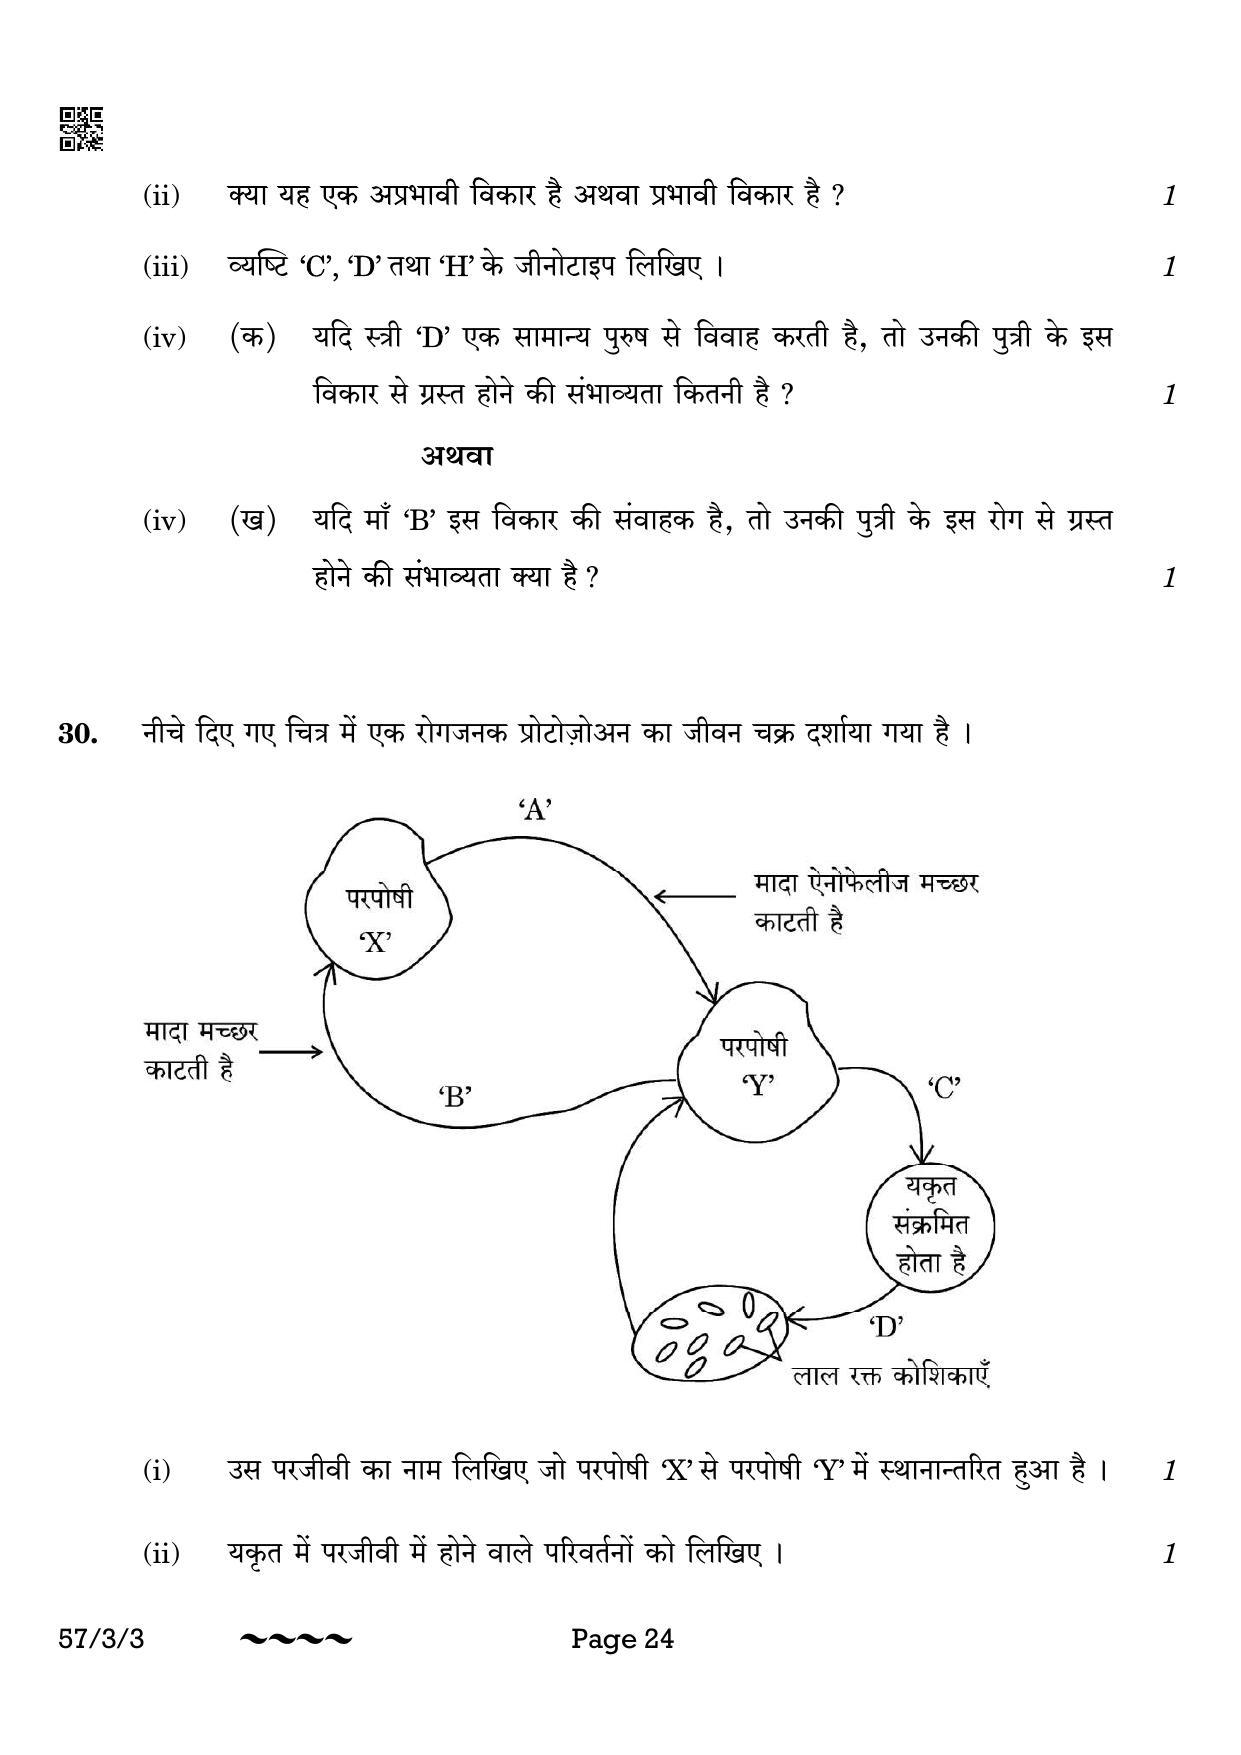 CBSE Class 12 57-3-3 Biology 2023 Question Paper - Page 24